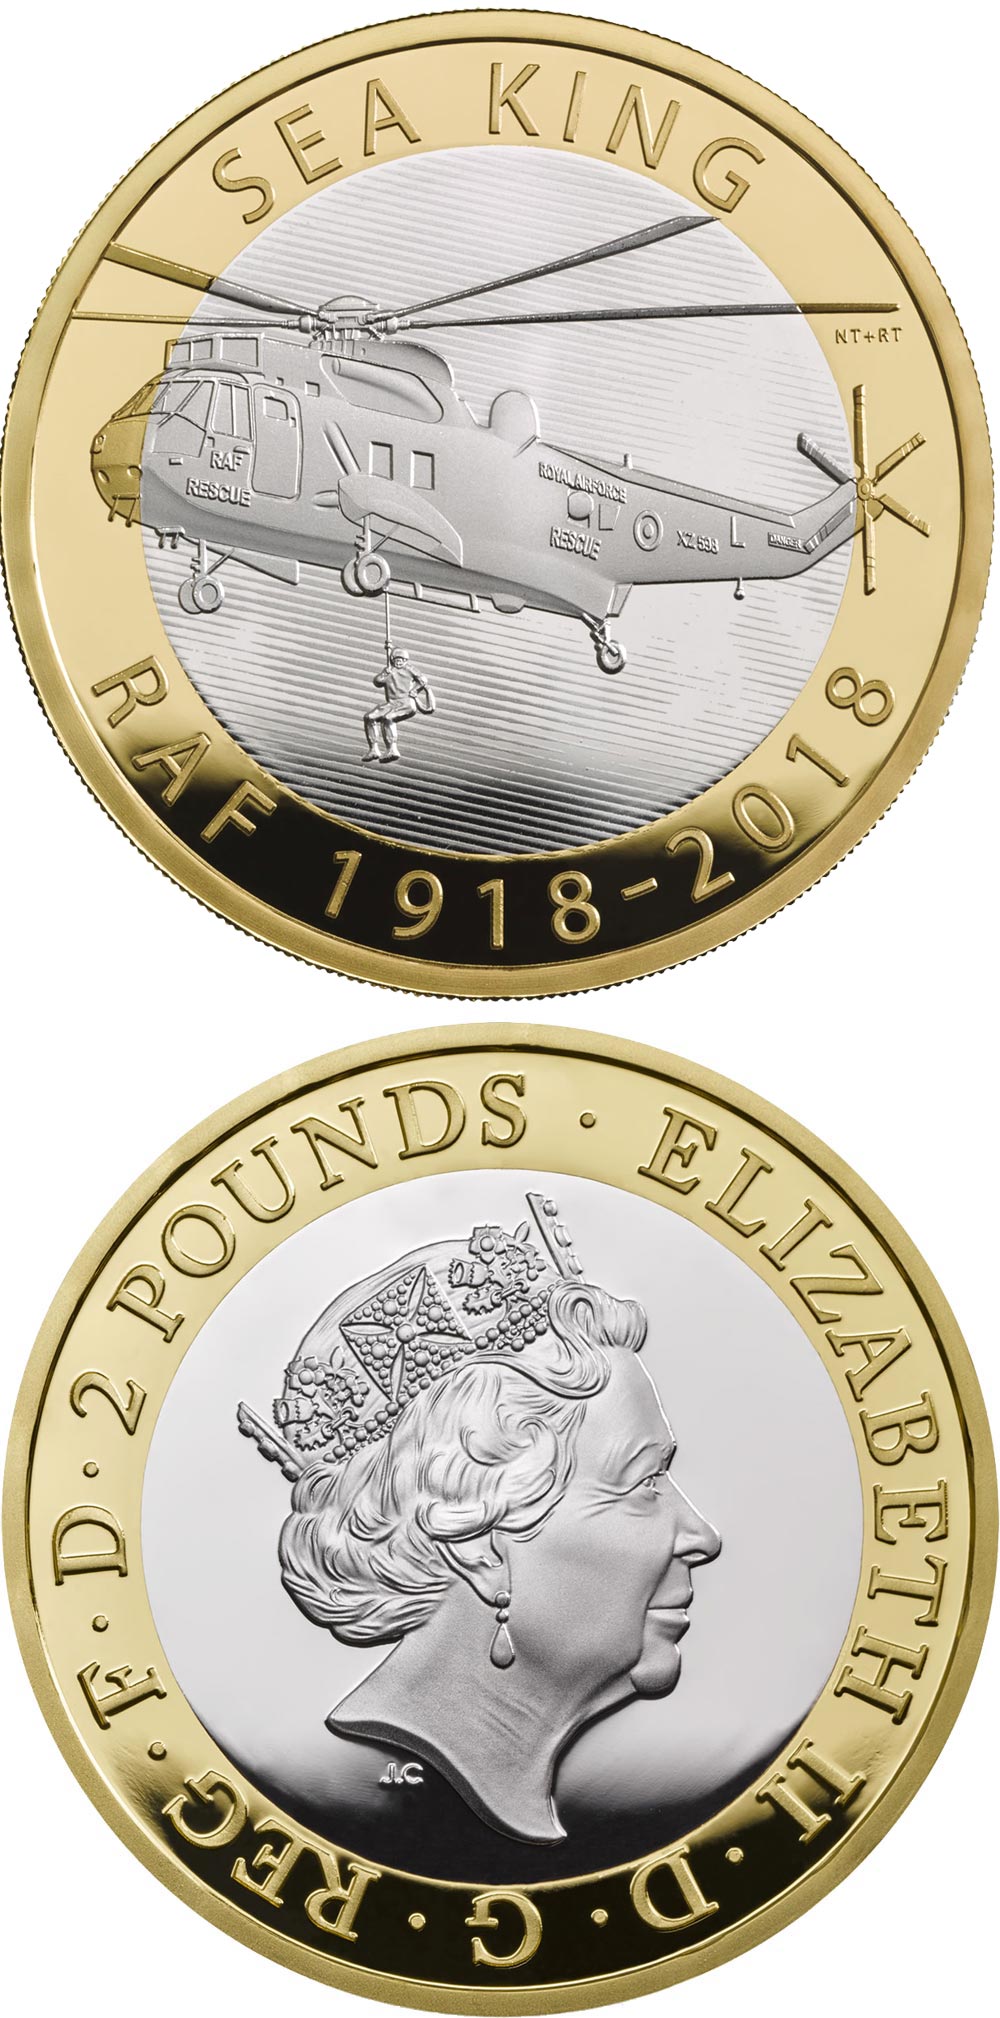 Image of 2 pounds coin - RAF Centenary Sea King | United Kingdom 2018.  The Bimetal: CuNi, nordic gold coin is of Proof, BU quality.